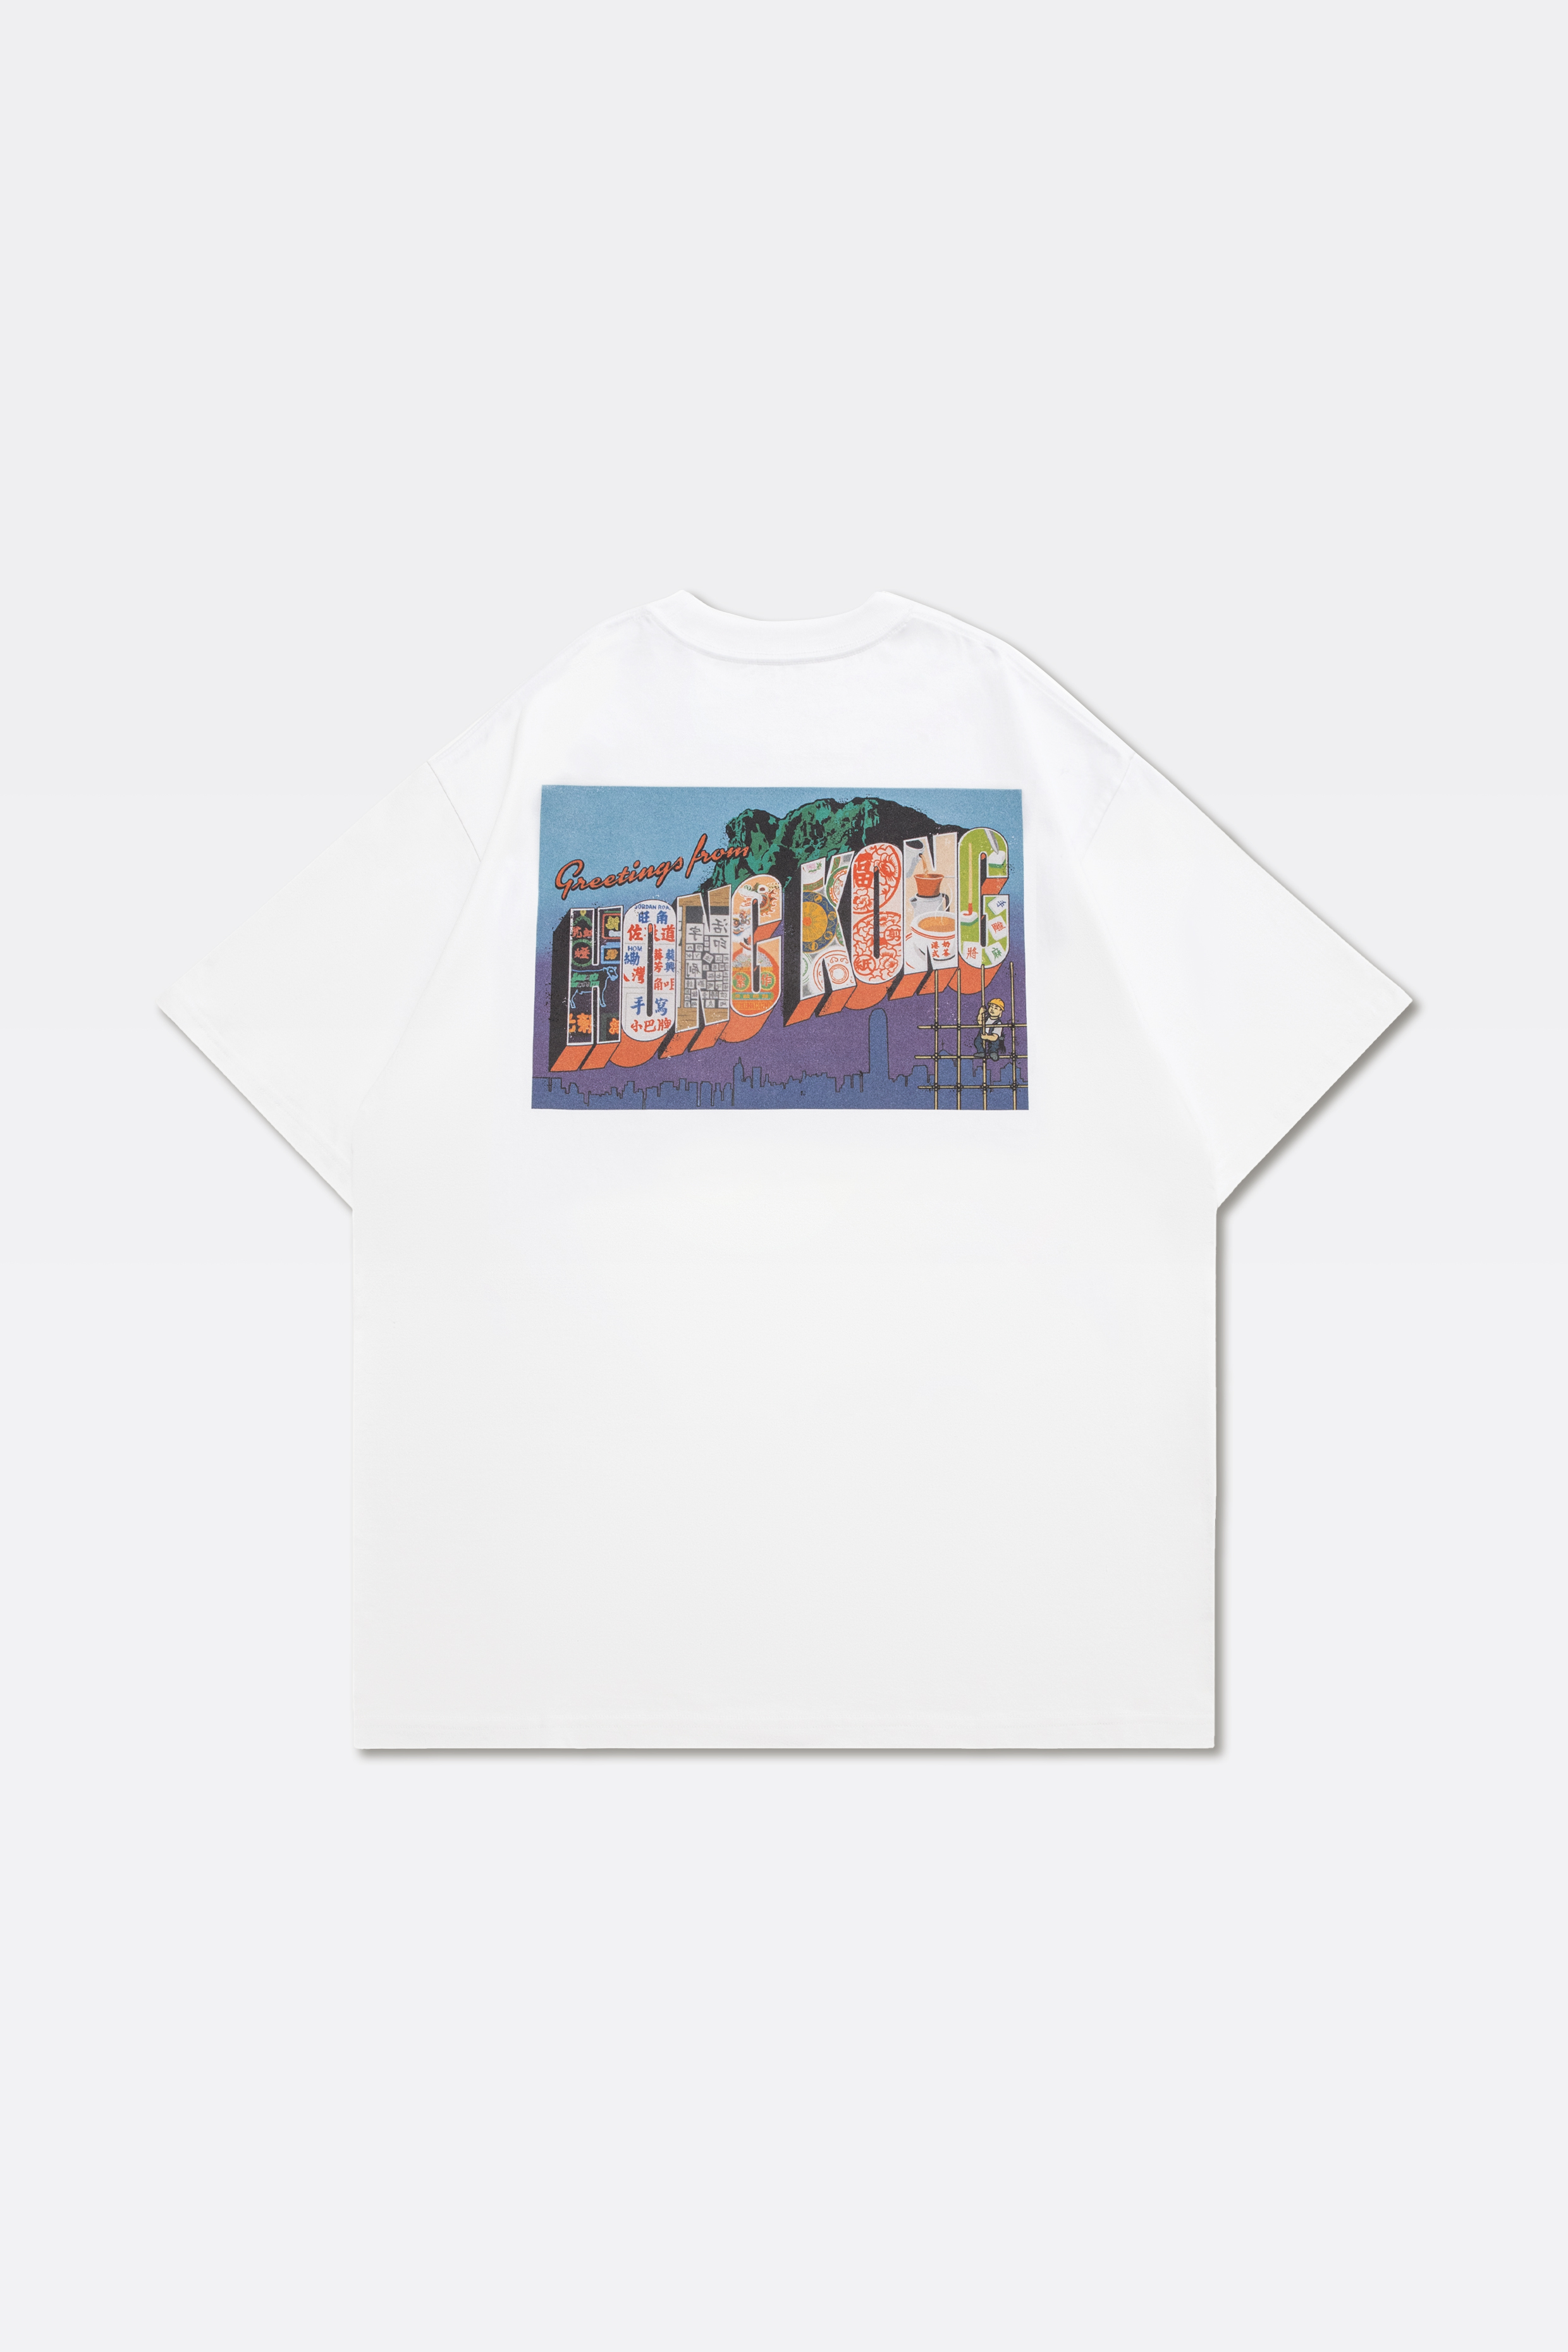 GROCERY GRODESIGN Greetings from Hong Kong Tee White